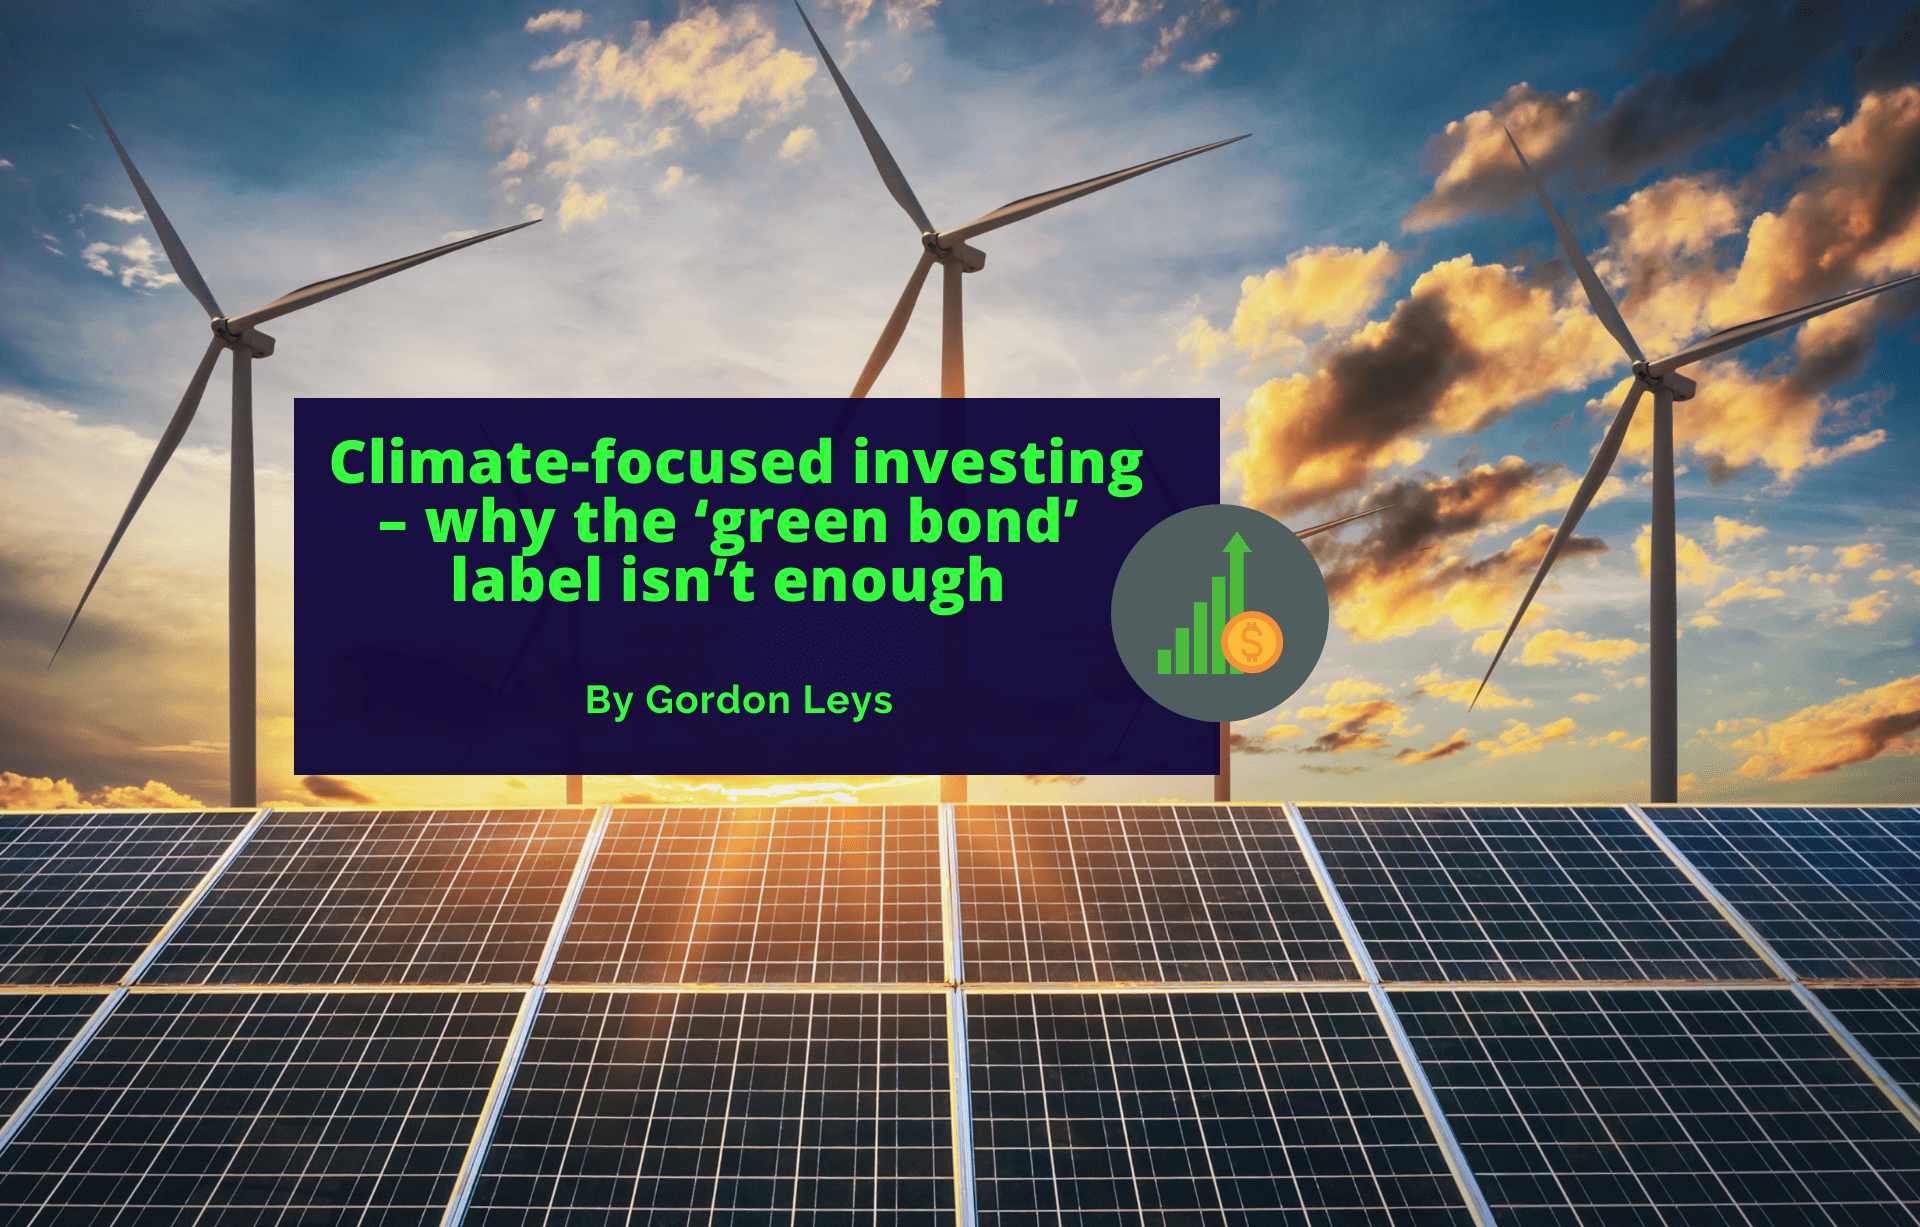 Climate-focused investing – why the ‘green bond’ label isn’t enough